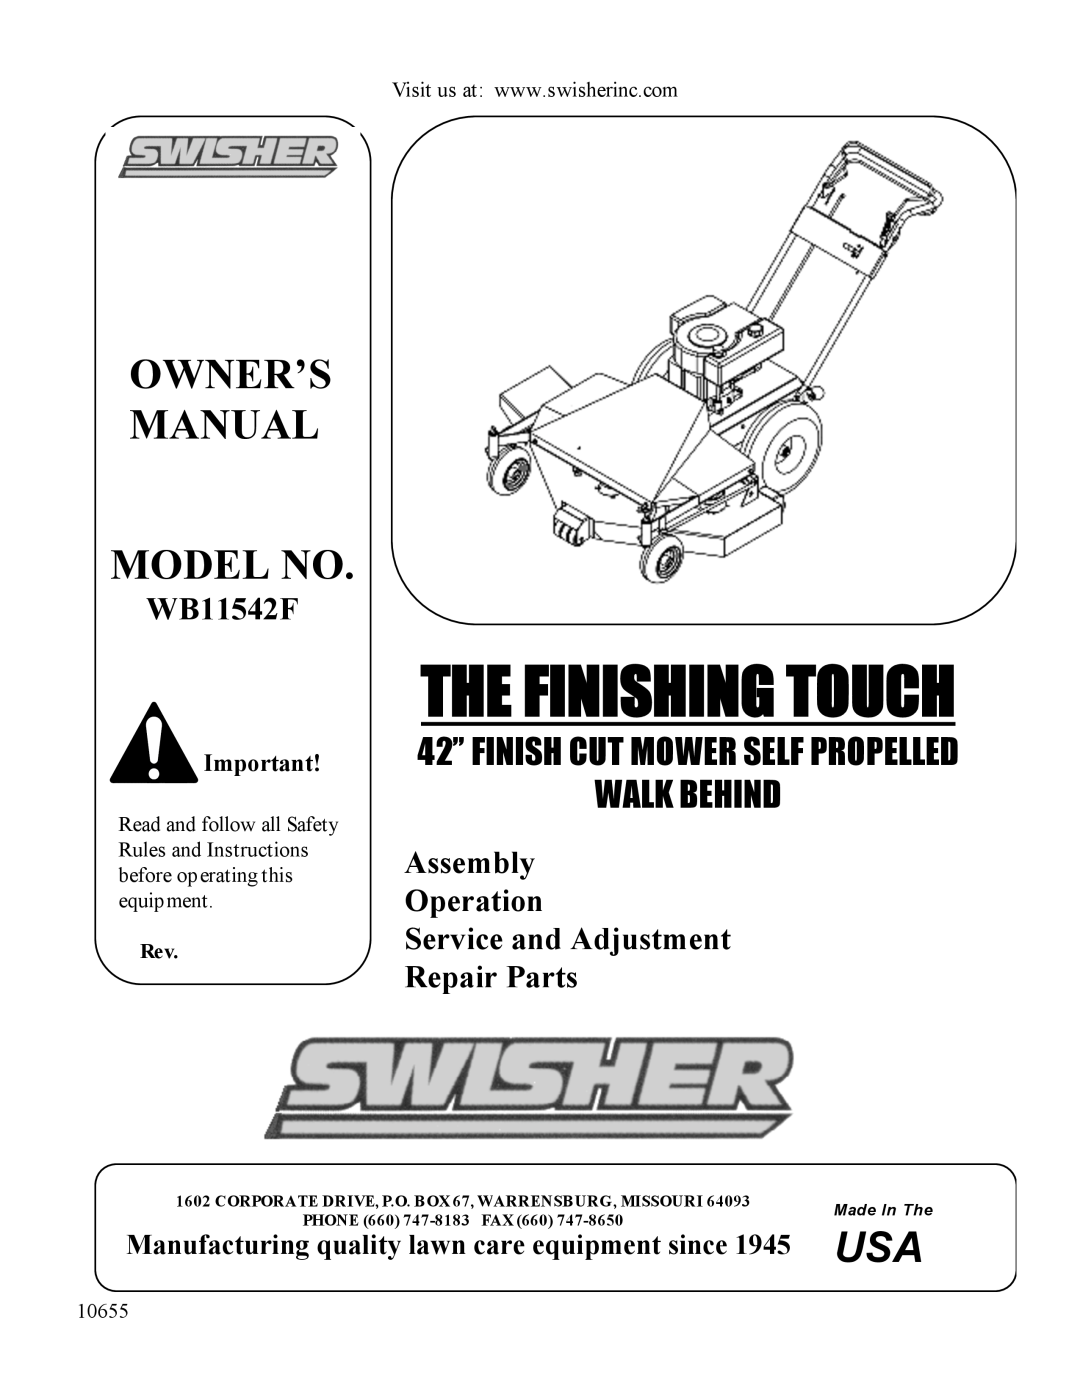 Swisher WB11542F owner manual Assembly Operation Service and Adjustment, Repair Parts, 10655, The Finishing Touch 